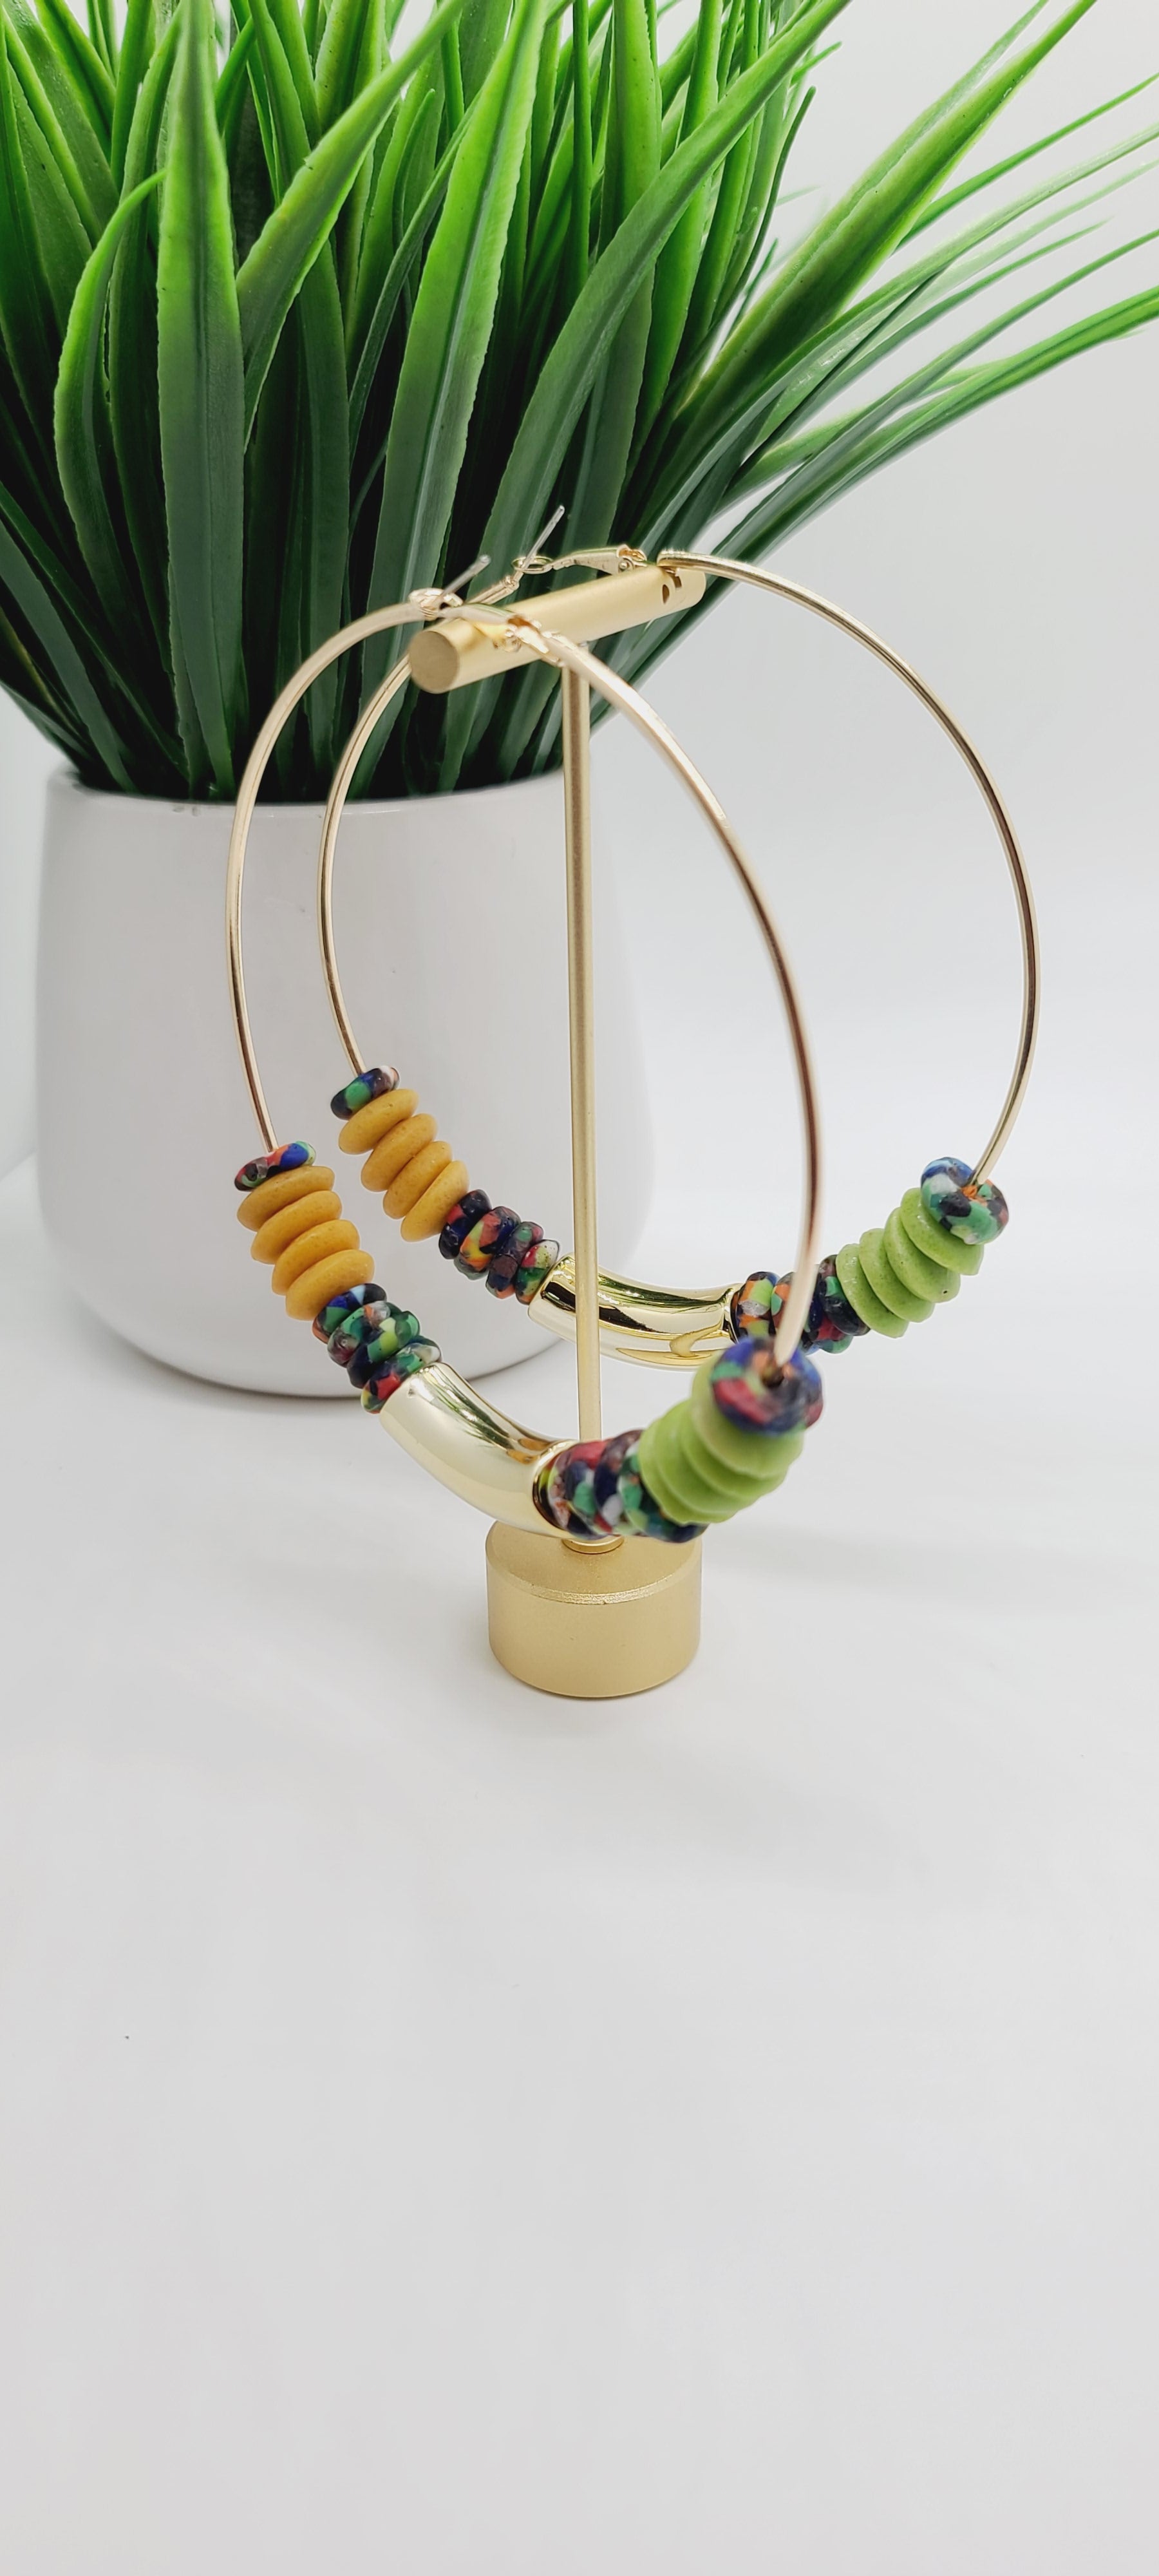 Length: 4x4 inches | Weight: 1.9 ounces  Distinctly You! These earrings are made with large gold Hoops, gold, green, multi-colored print Ashanti glass saucers, and curved gold resin charm.